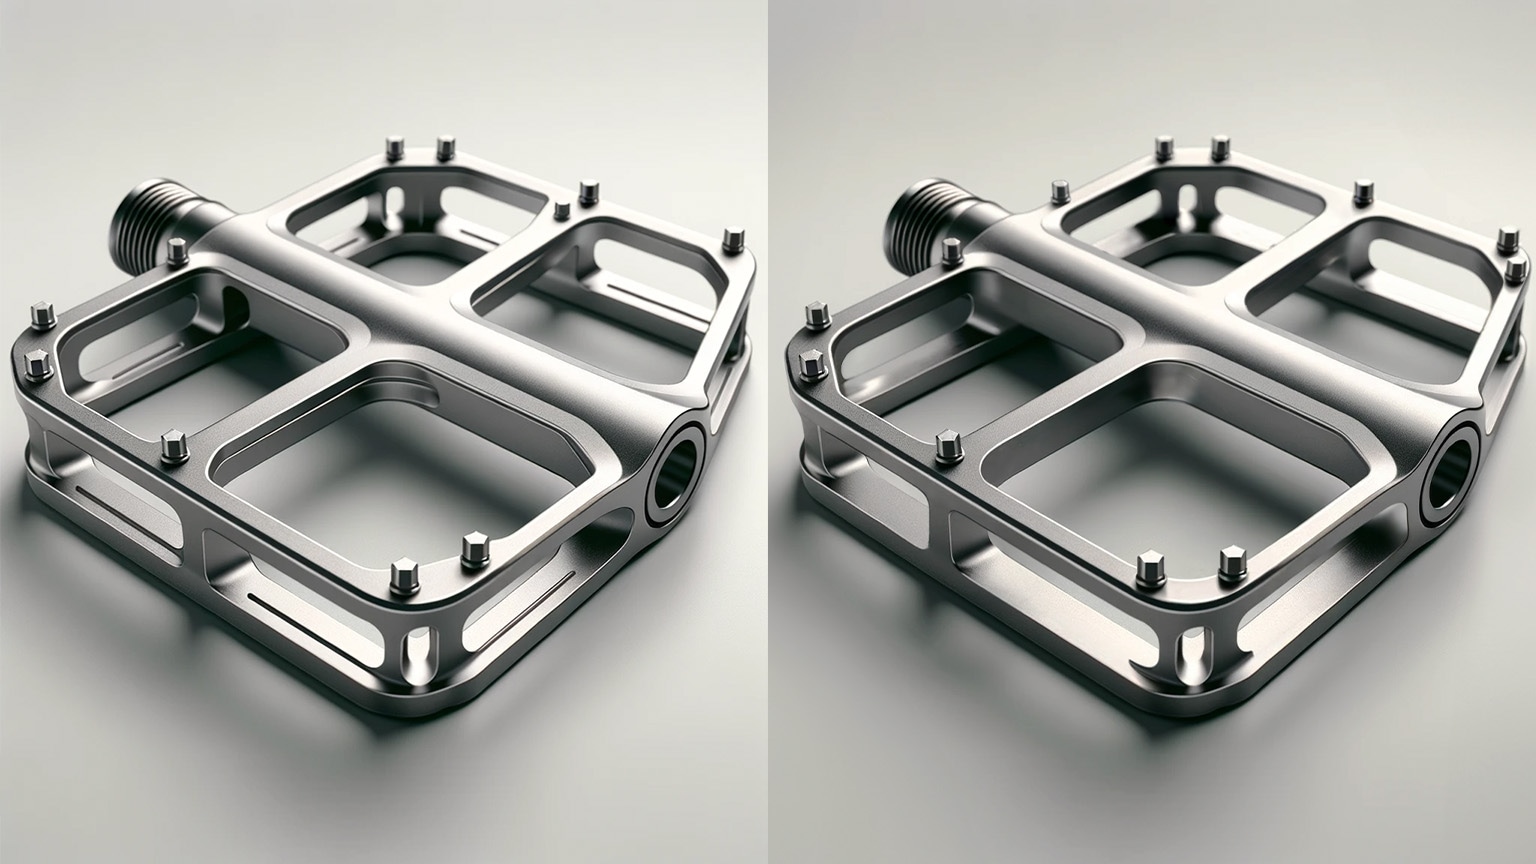 An image comparing the final raw output of a titanium bicycle pedal from generative AI following iterative prompting and the same image after it has been refined using image-editing software.  The raw image shows studs and structural supports inconsistently placed and grooves marked on inside surfaces. After refinement by the designer, the studs are uniformly positioned, the interior surfaces are smooth, and the structural supports are precisely aligned with the corners and center of the pedal for improved strength.